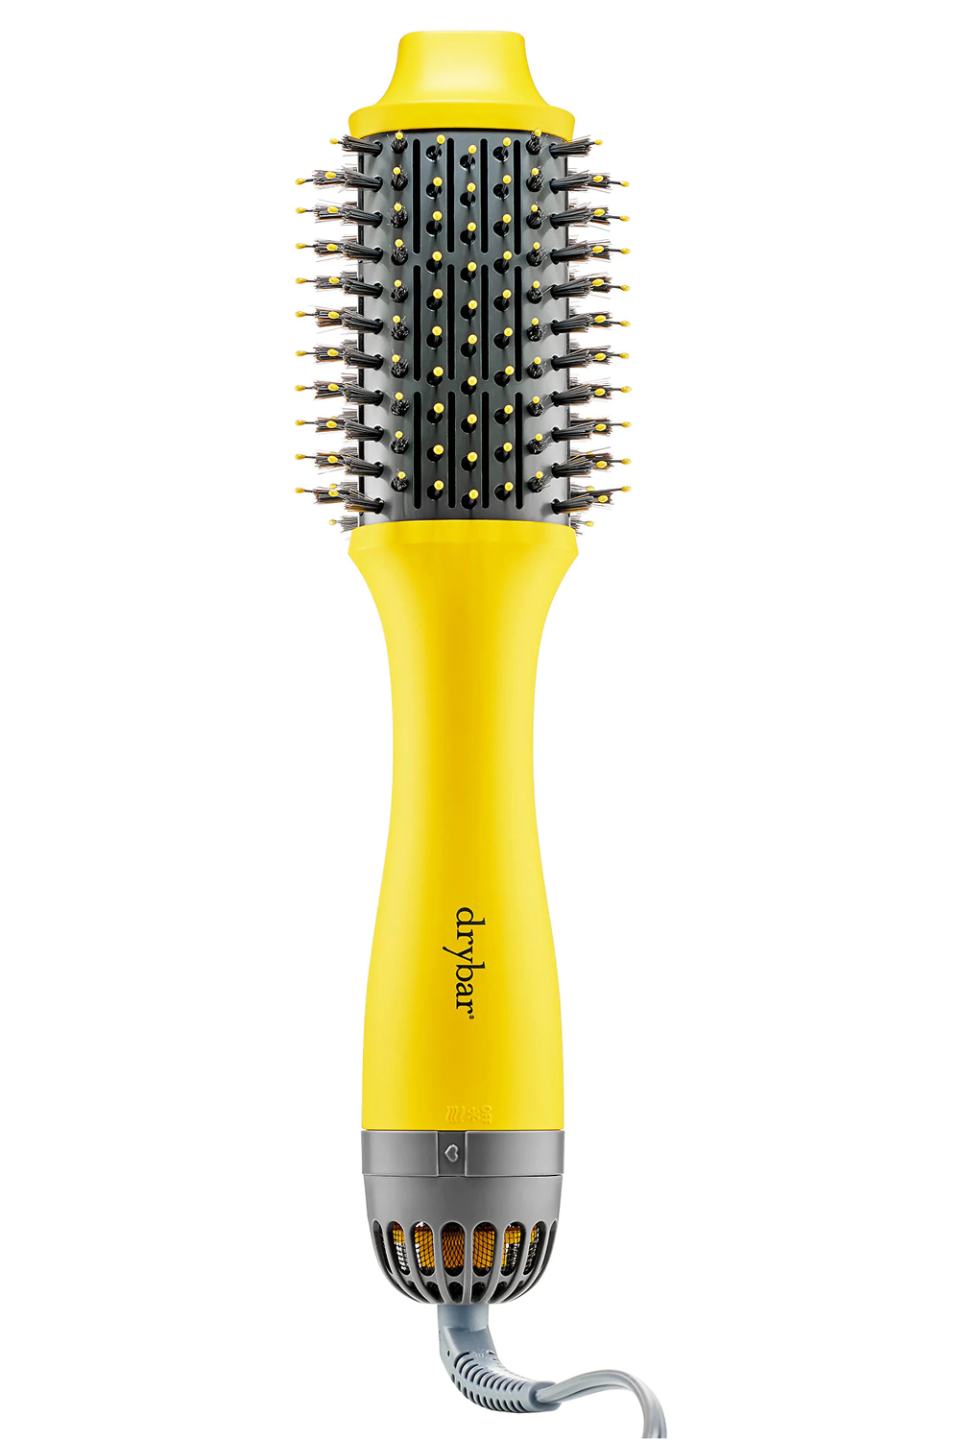 <p><strong>Drybar</strong></p><p>amazon.com</p><p><strong>$155.00</strong></p><p><a href="https://www.amazon.com/dp/B083XFM9B7?tag=syn-yahoo-20&ascsubtag=%5Bartid%7C10049.g.32271508%5Bsrc%7Cyahoo-us" rel="nofollow noopener" target="_blank" data-ylk="slk:Shop Now" class="link ">Shop Now</a></p><p>In an ideal world, we’d all be able to go to a <a href="https://www.drybarshops.com/service/locator/" rel="nofollow noopener" target="_blank" data-ylk="slk:Drybar" class="link ">Drybar</a> every other day for a (free) professional blowout, right? Dreams. The next best thing? This blow-dryer brush, which has three heat settings (cool, medium, and high) along with an ionic base (sounds fake, but <strong>ionic technology really does help seal your hair cuticle and curb <a href="https://www.cosmopolitan.com/style-beauty/beauty/a33187/how-to-defrizz-your-hair/" rel="nofollow noopener" target="_blank" data-ylk="slk:flyaways and frizz" class="link ">flyaways and frizz</a></strong>) to help you get a shiny blowout on your own. And that baaaasically justifies the price.</p><p><strong><em>THE REVIEW: "</em></strong><em>Because my hair is very thick, it often gets frizzy with a blow dryer, but this takes the frizz! I’ve owned several hair-dryer brushes in the last decade and was hesitant about this one due to price but let me tell you, it is worth it!</em><strong><em>" </em></strong><em>writes <a href="https://www.amazon.com/dp/B083XFM9B7?tag=syn-yahoo-20&ascsubtag=%5Bartid%7C10049.g.32271508%5Bsrc%7Cyahoo-us#customerReviews" rel="nofollow noopener" target="_blank" data-ylk="slk:one tester" class="link ">one tester</a>.</em></p>